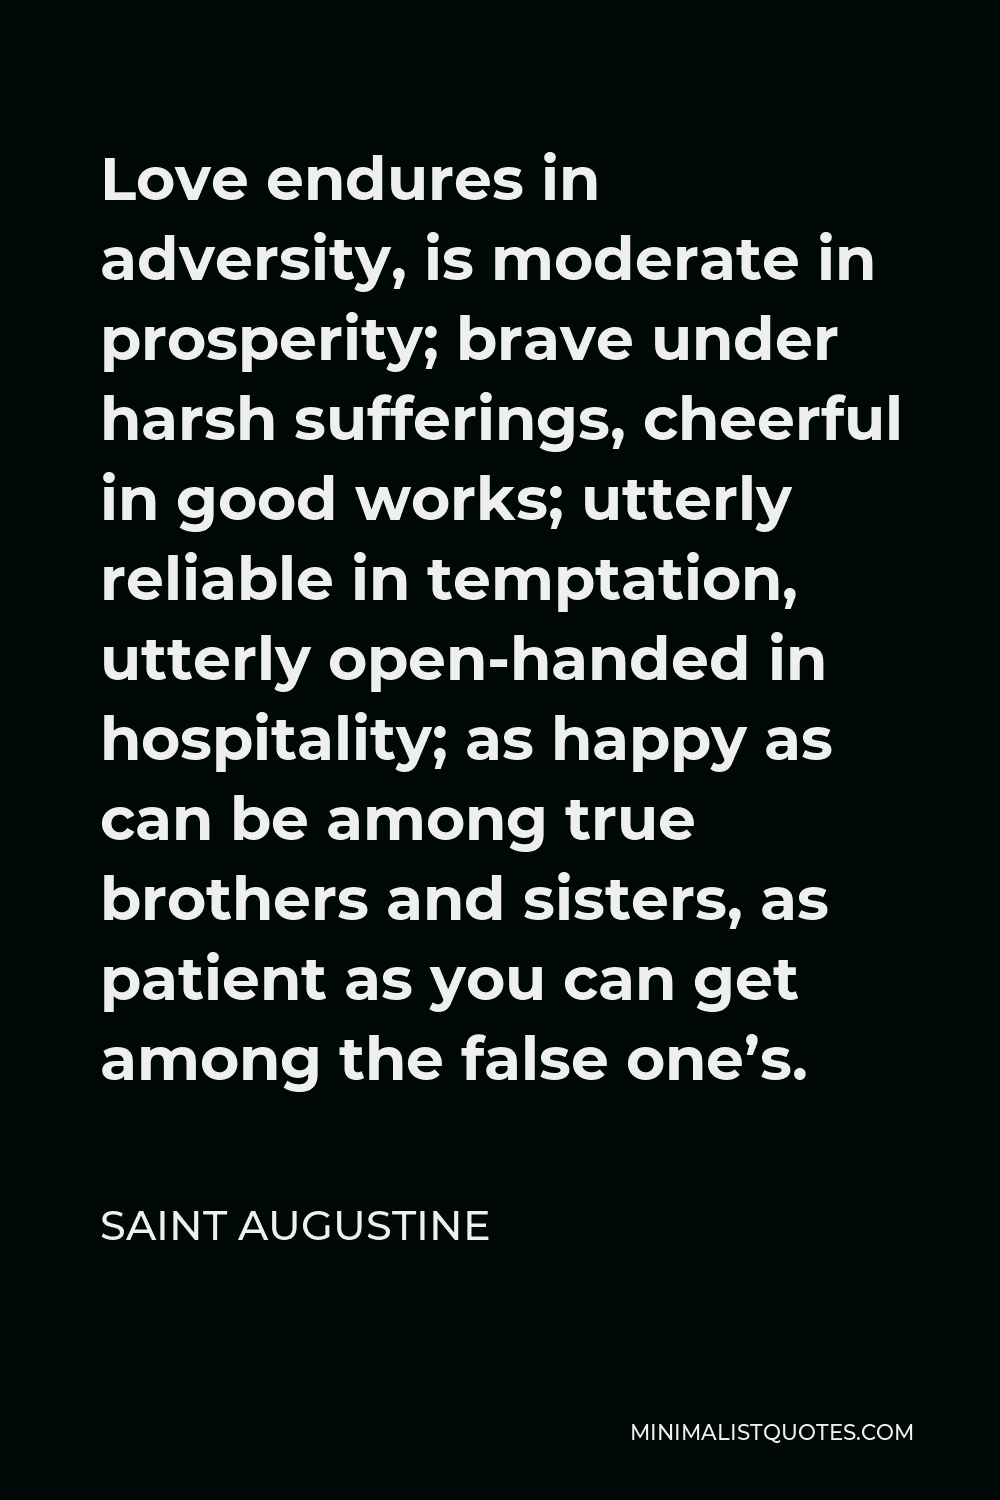 Saint Augustine Quote - Love endures in adversity, is moderate in prosperity; brave under harsh sufferings, cheerful in good works; utterly reliable in temptation, utterly open-handed in hospitality; as happy as can be among true brothers and sisters, as patient as you can get among the false one’s.